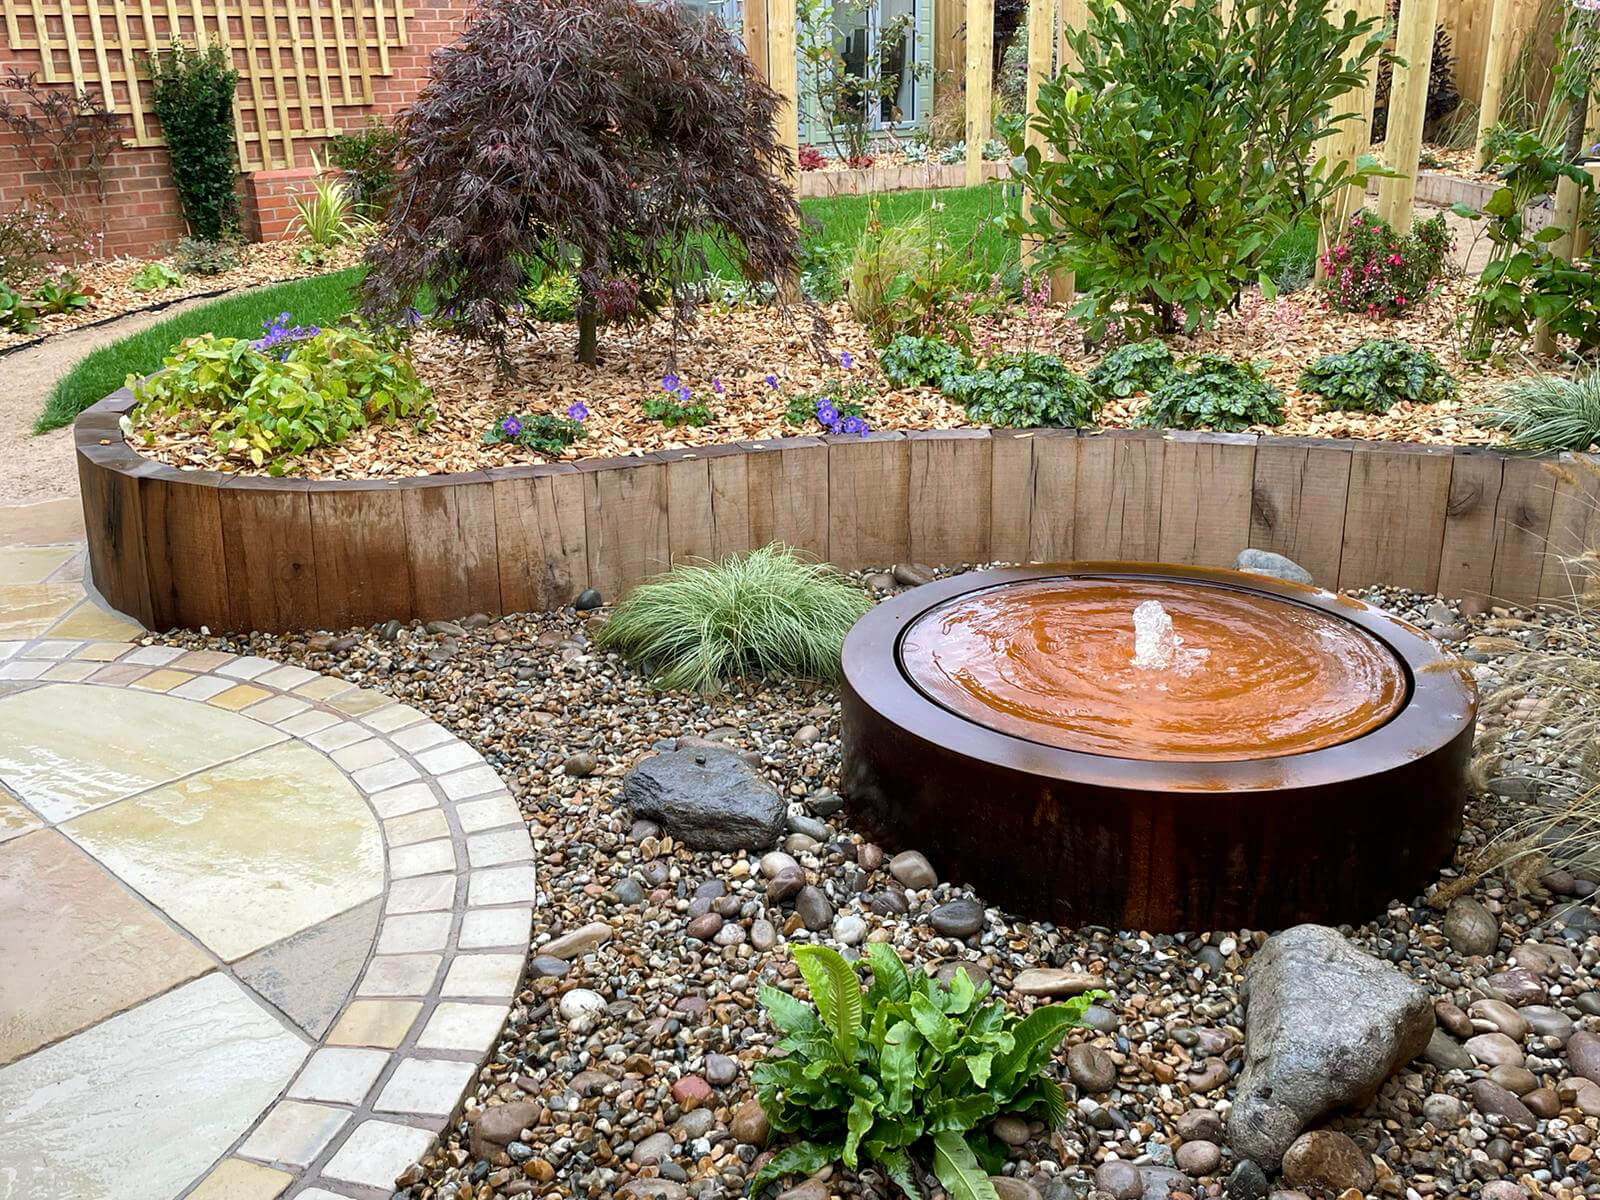 Garden Design with Water Feature and Raised Planting Area